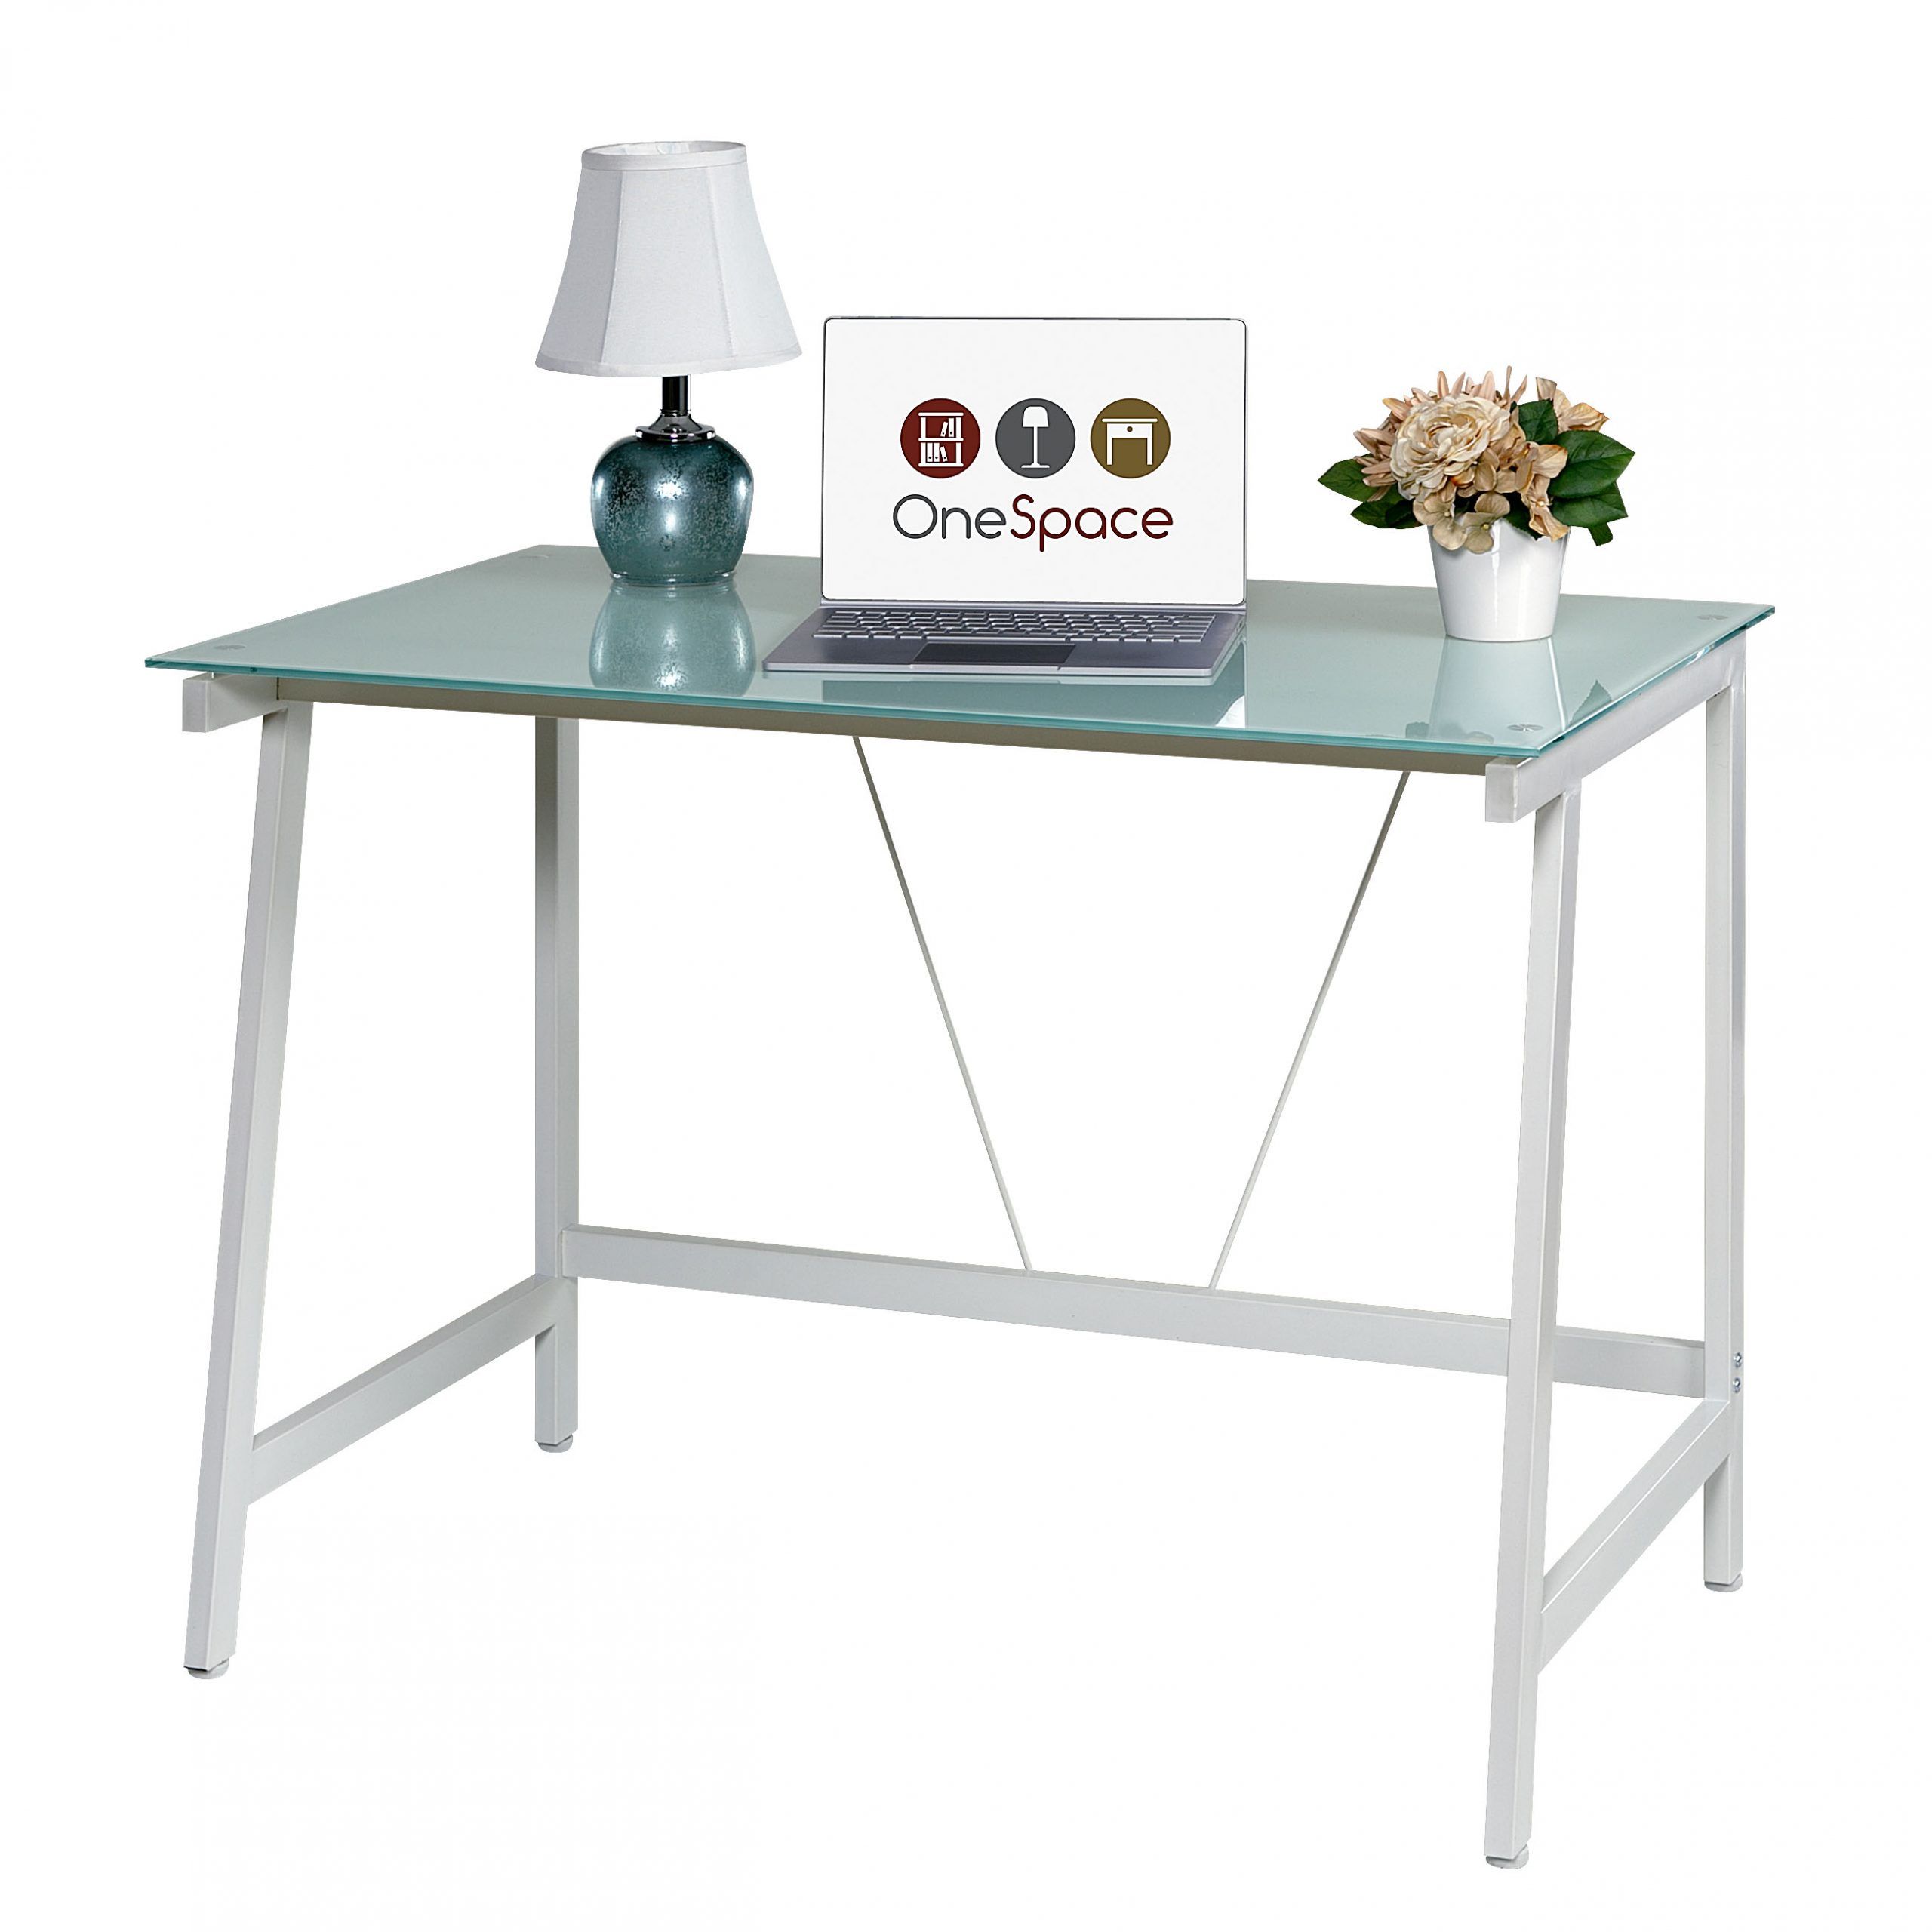 Onespace 50 Hd0107 Contemporary Glass Writing Desk, Steel Frame, White Pertaining To Glass And Walnut Modern Writing Desks (View 1 of 15)